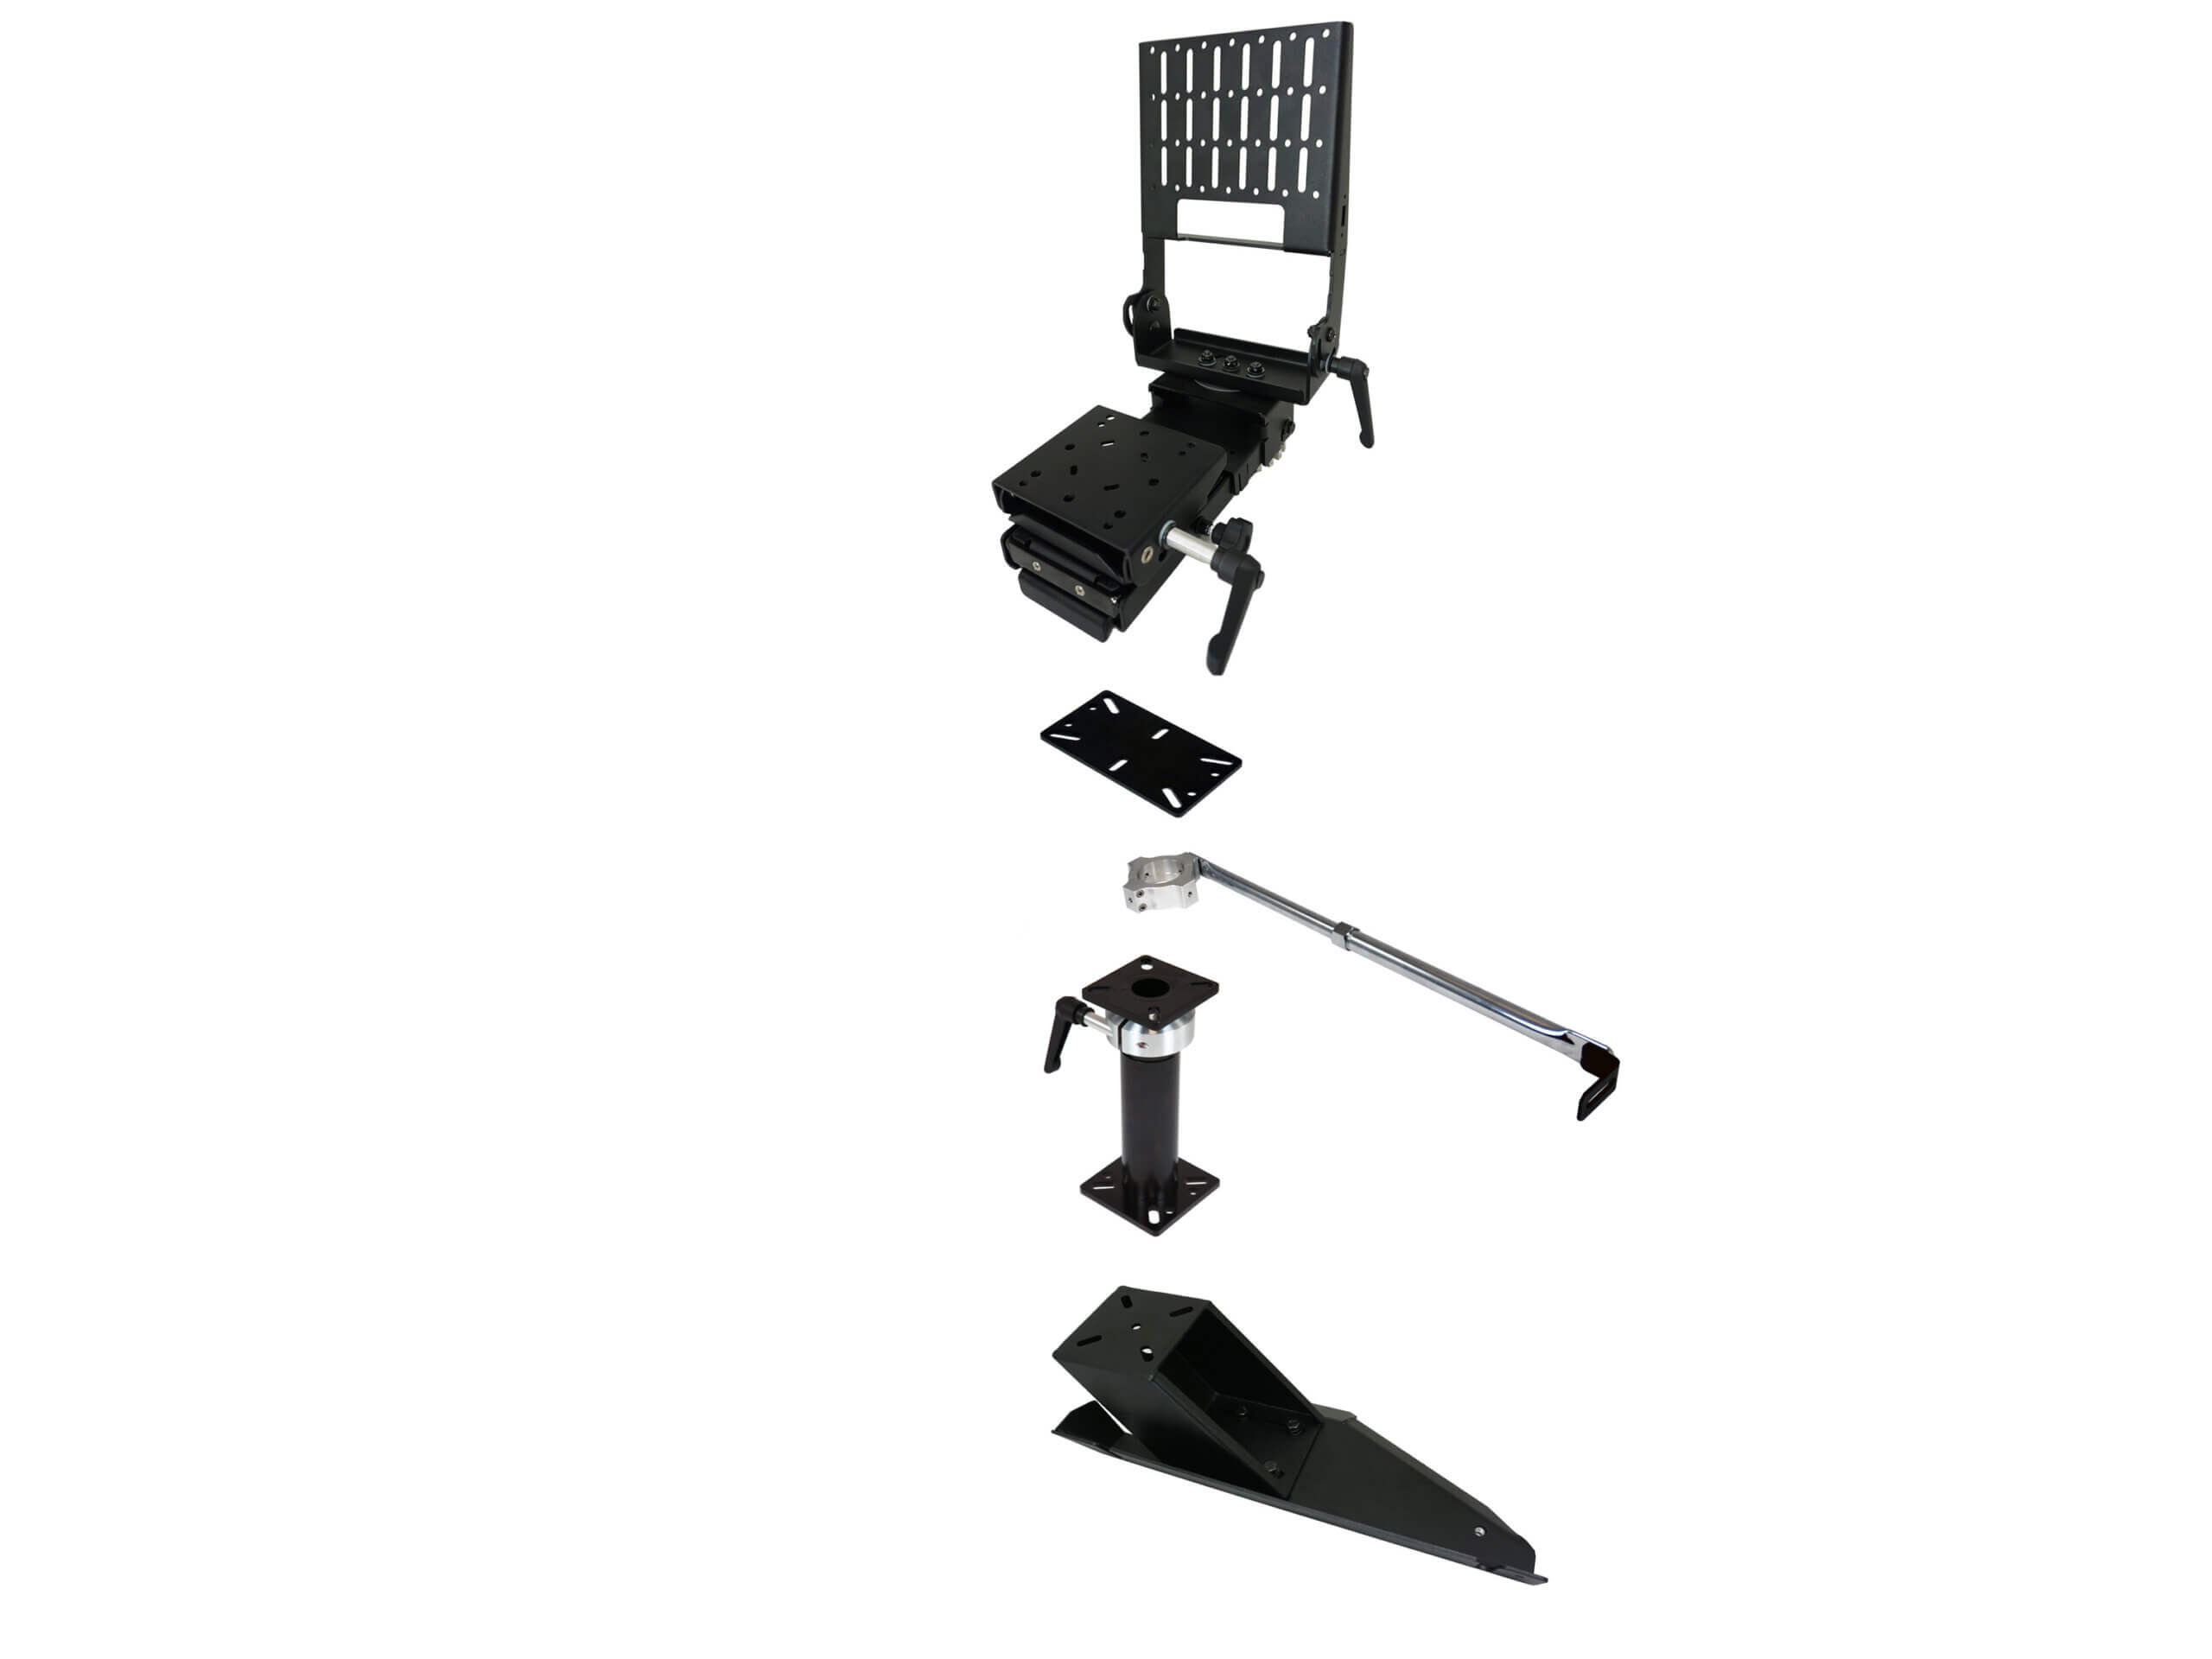 Premium Tablet Pedestal Mount Package For 2013-2023 Dodge Ram 1500 Special Services Police Truck, Tradesman & 1500, 2500 & 3500 Retail Pickup & Ram 4500/5500 Chassis Cab Truck With DS Trim Level (Known As “Classic” Body Style)